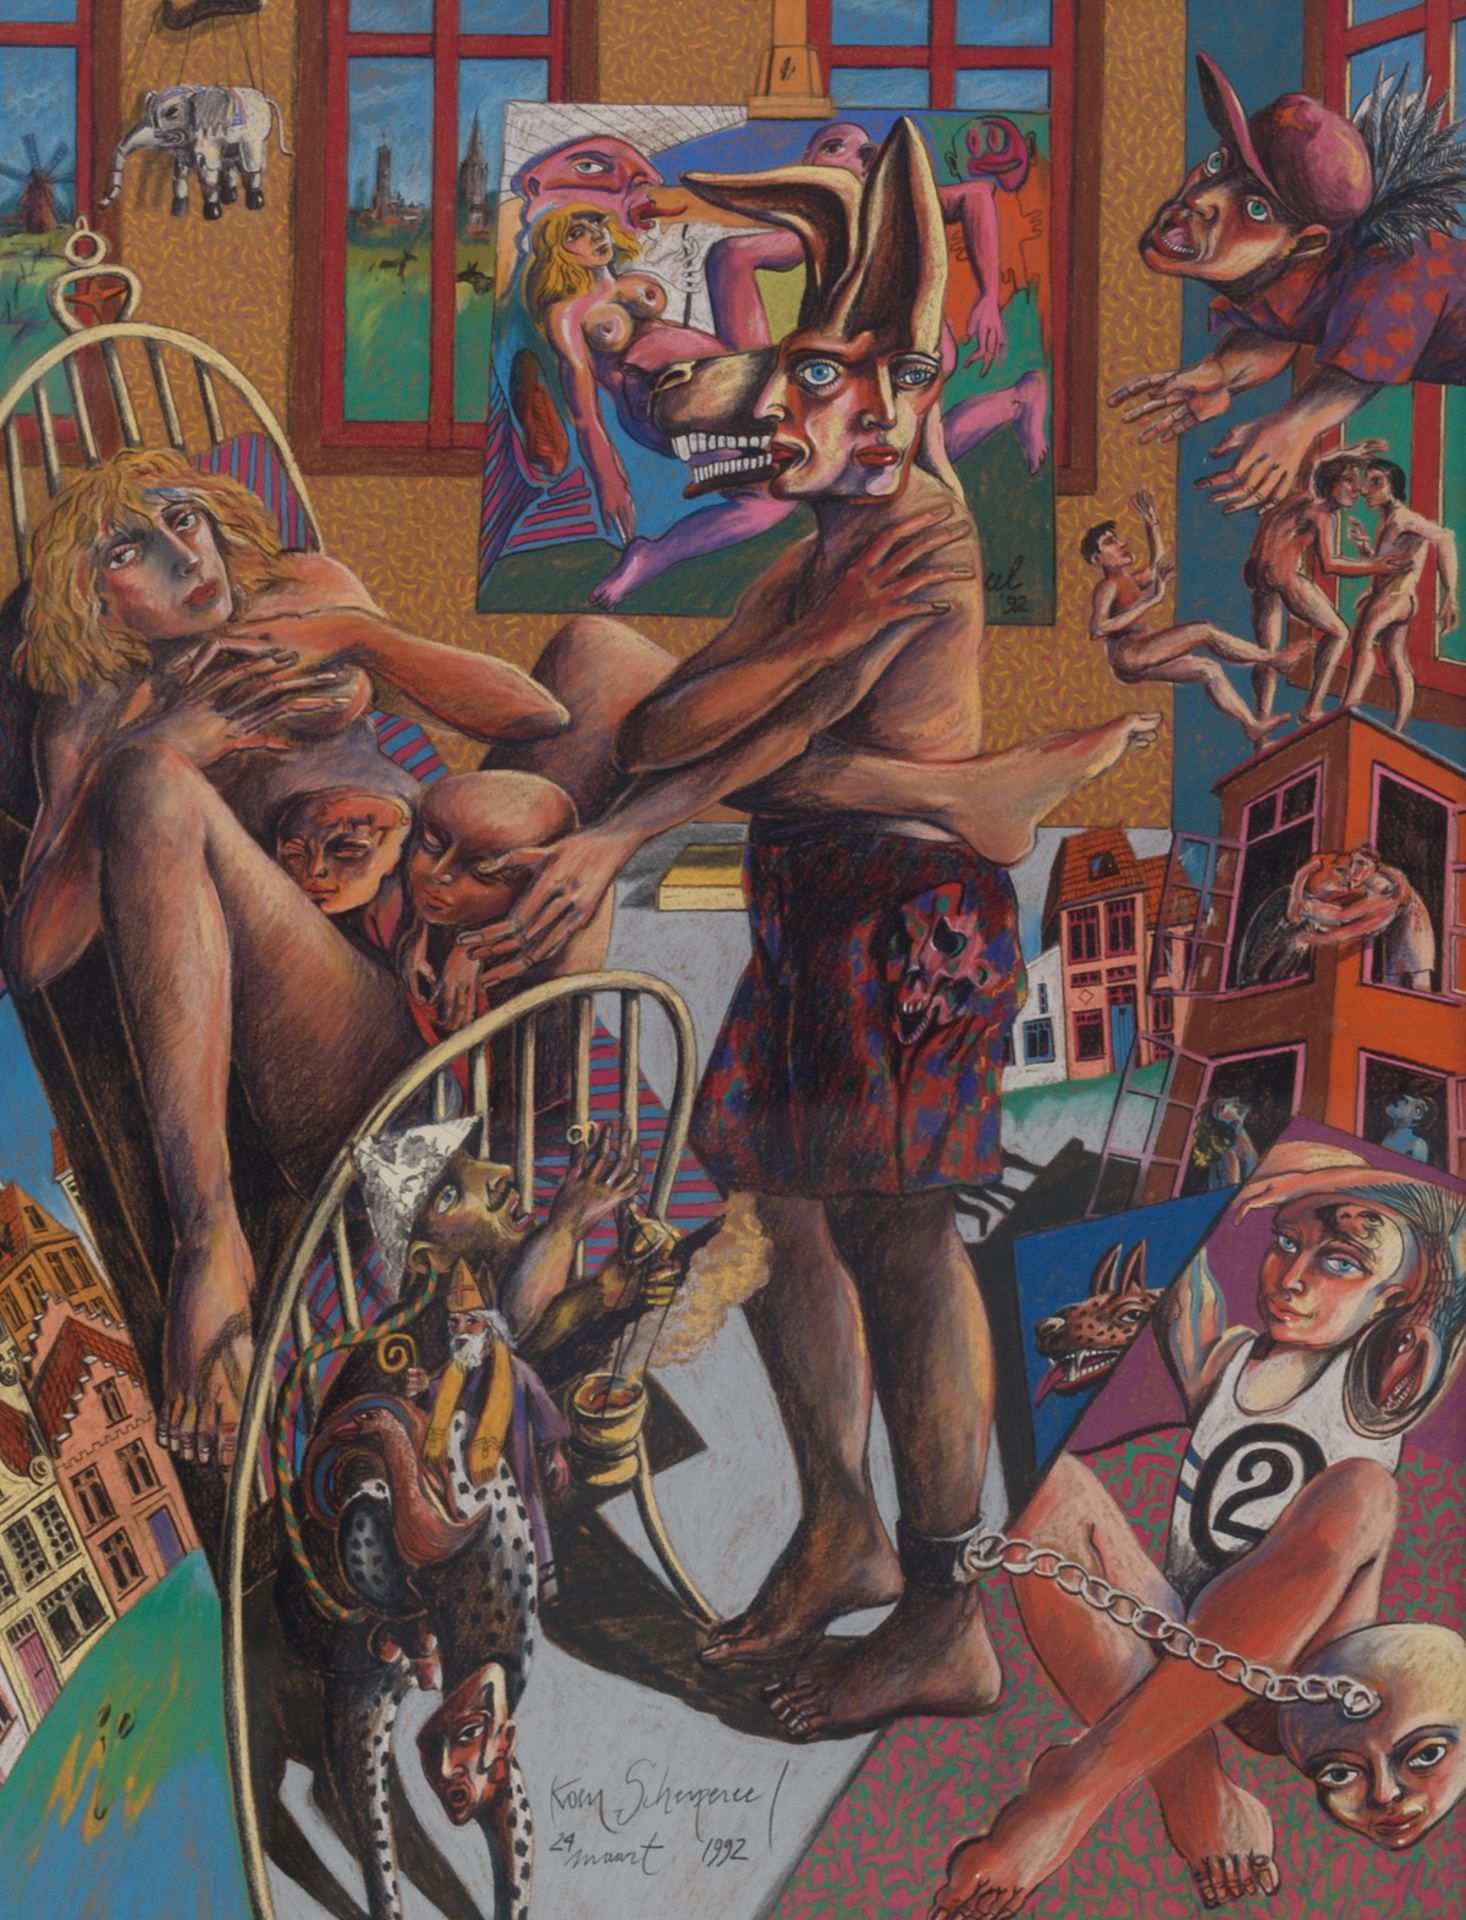 Scherpereel K., untitled, dated '29 maart 1992', gouache and pencil / crayon, 47 x 62 cm Is possibly